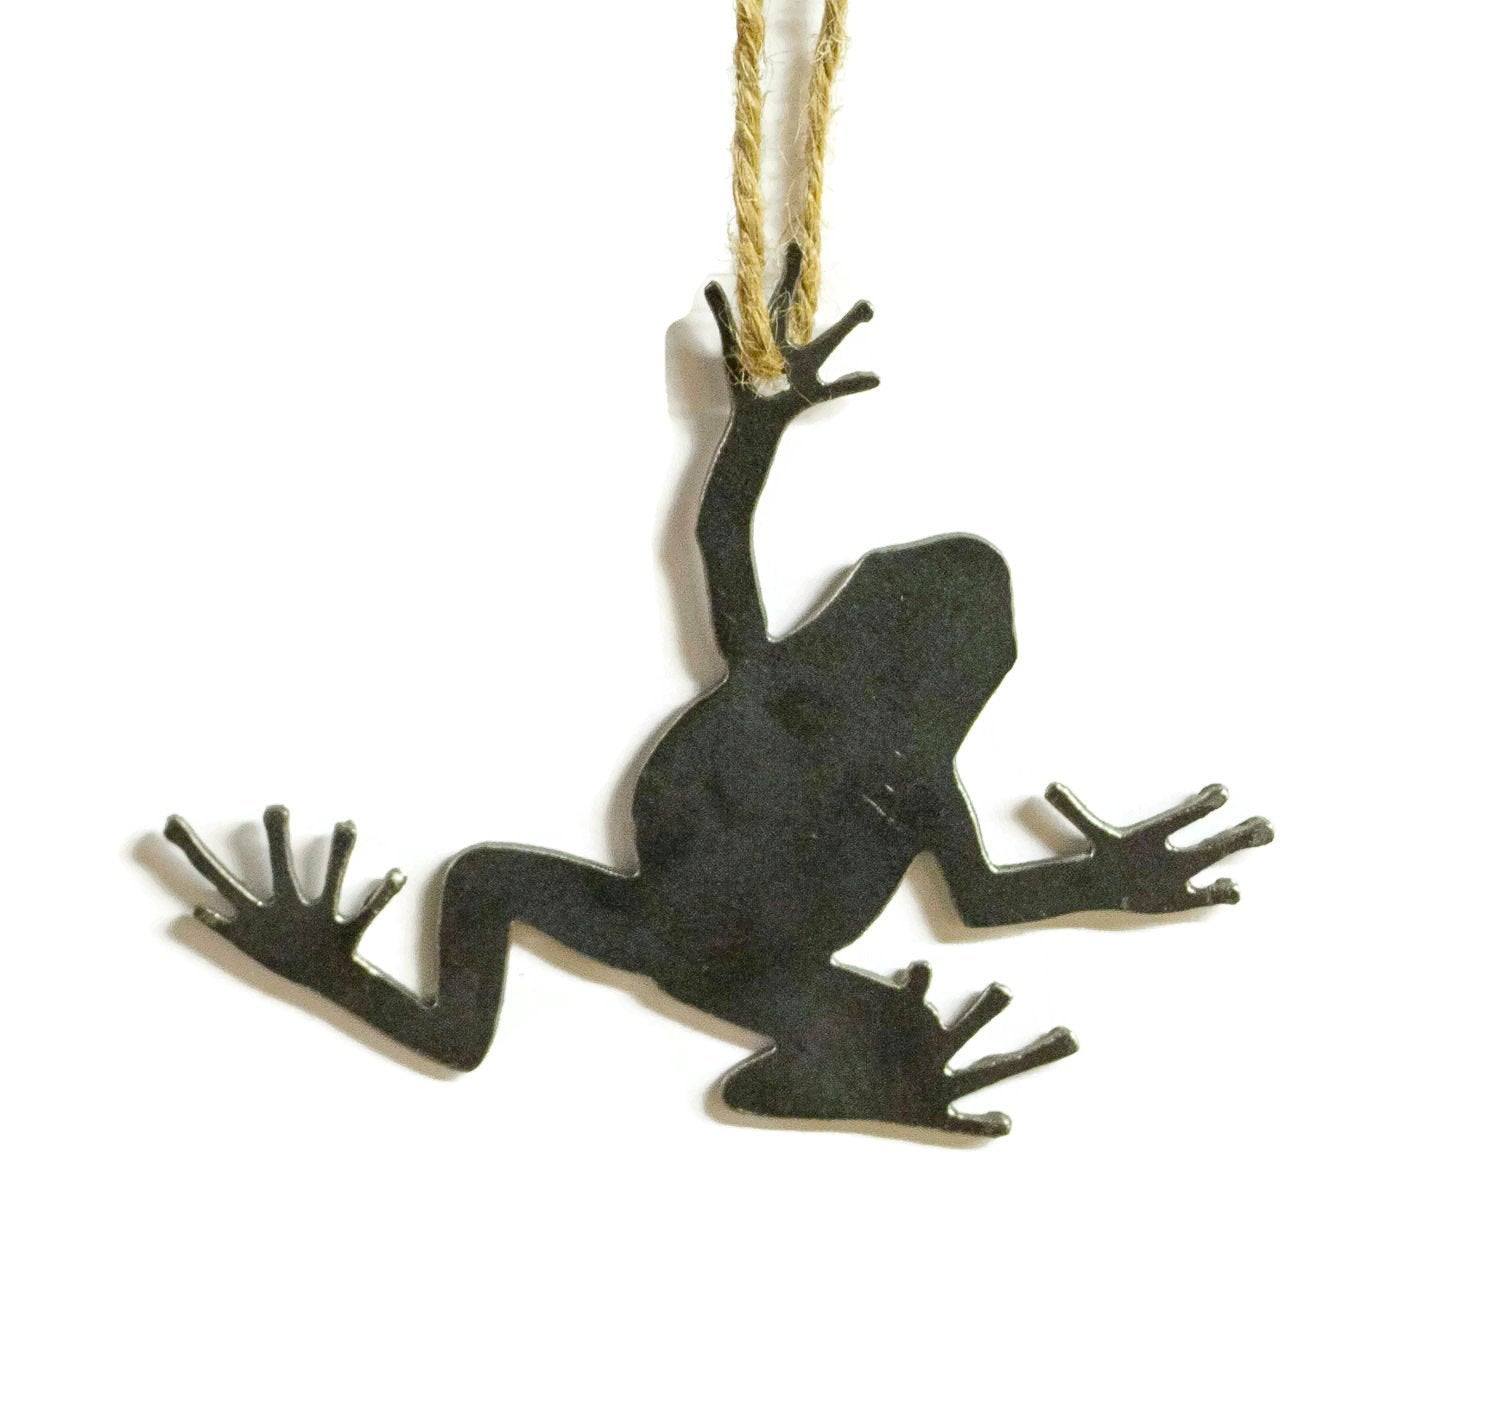 Frog Metal Christmas Tree Ornament Holiday Decoration Raw Steel Gift Recycled Nature Home Decor